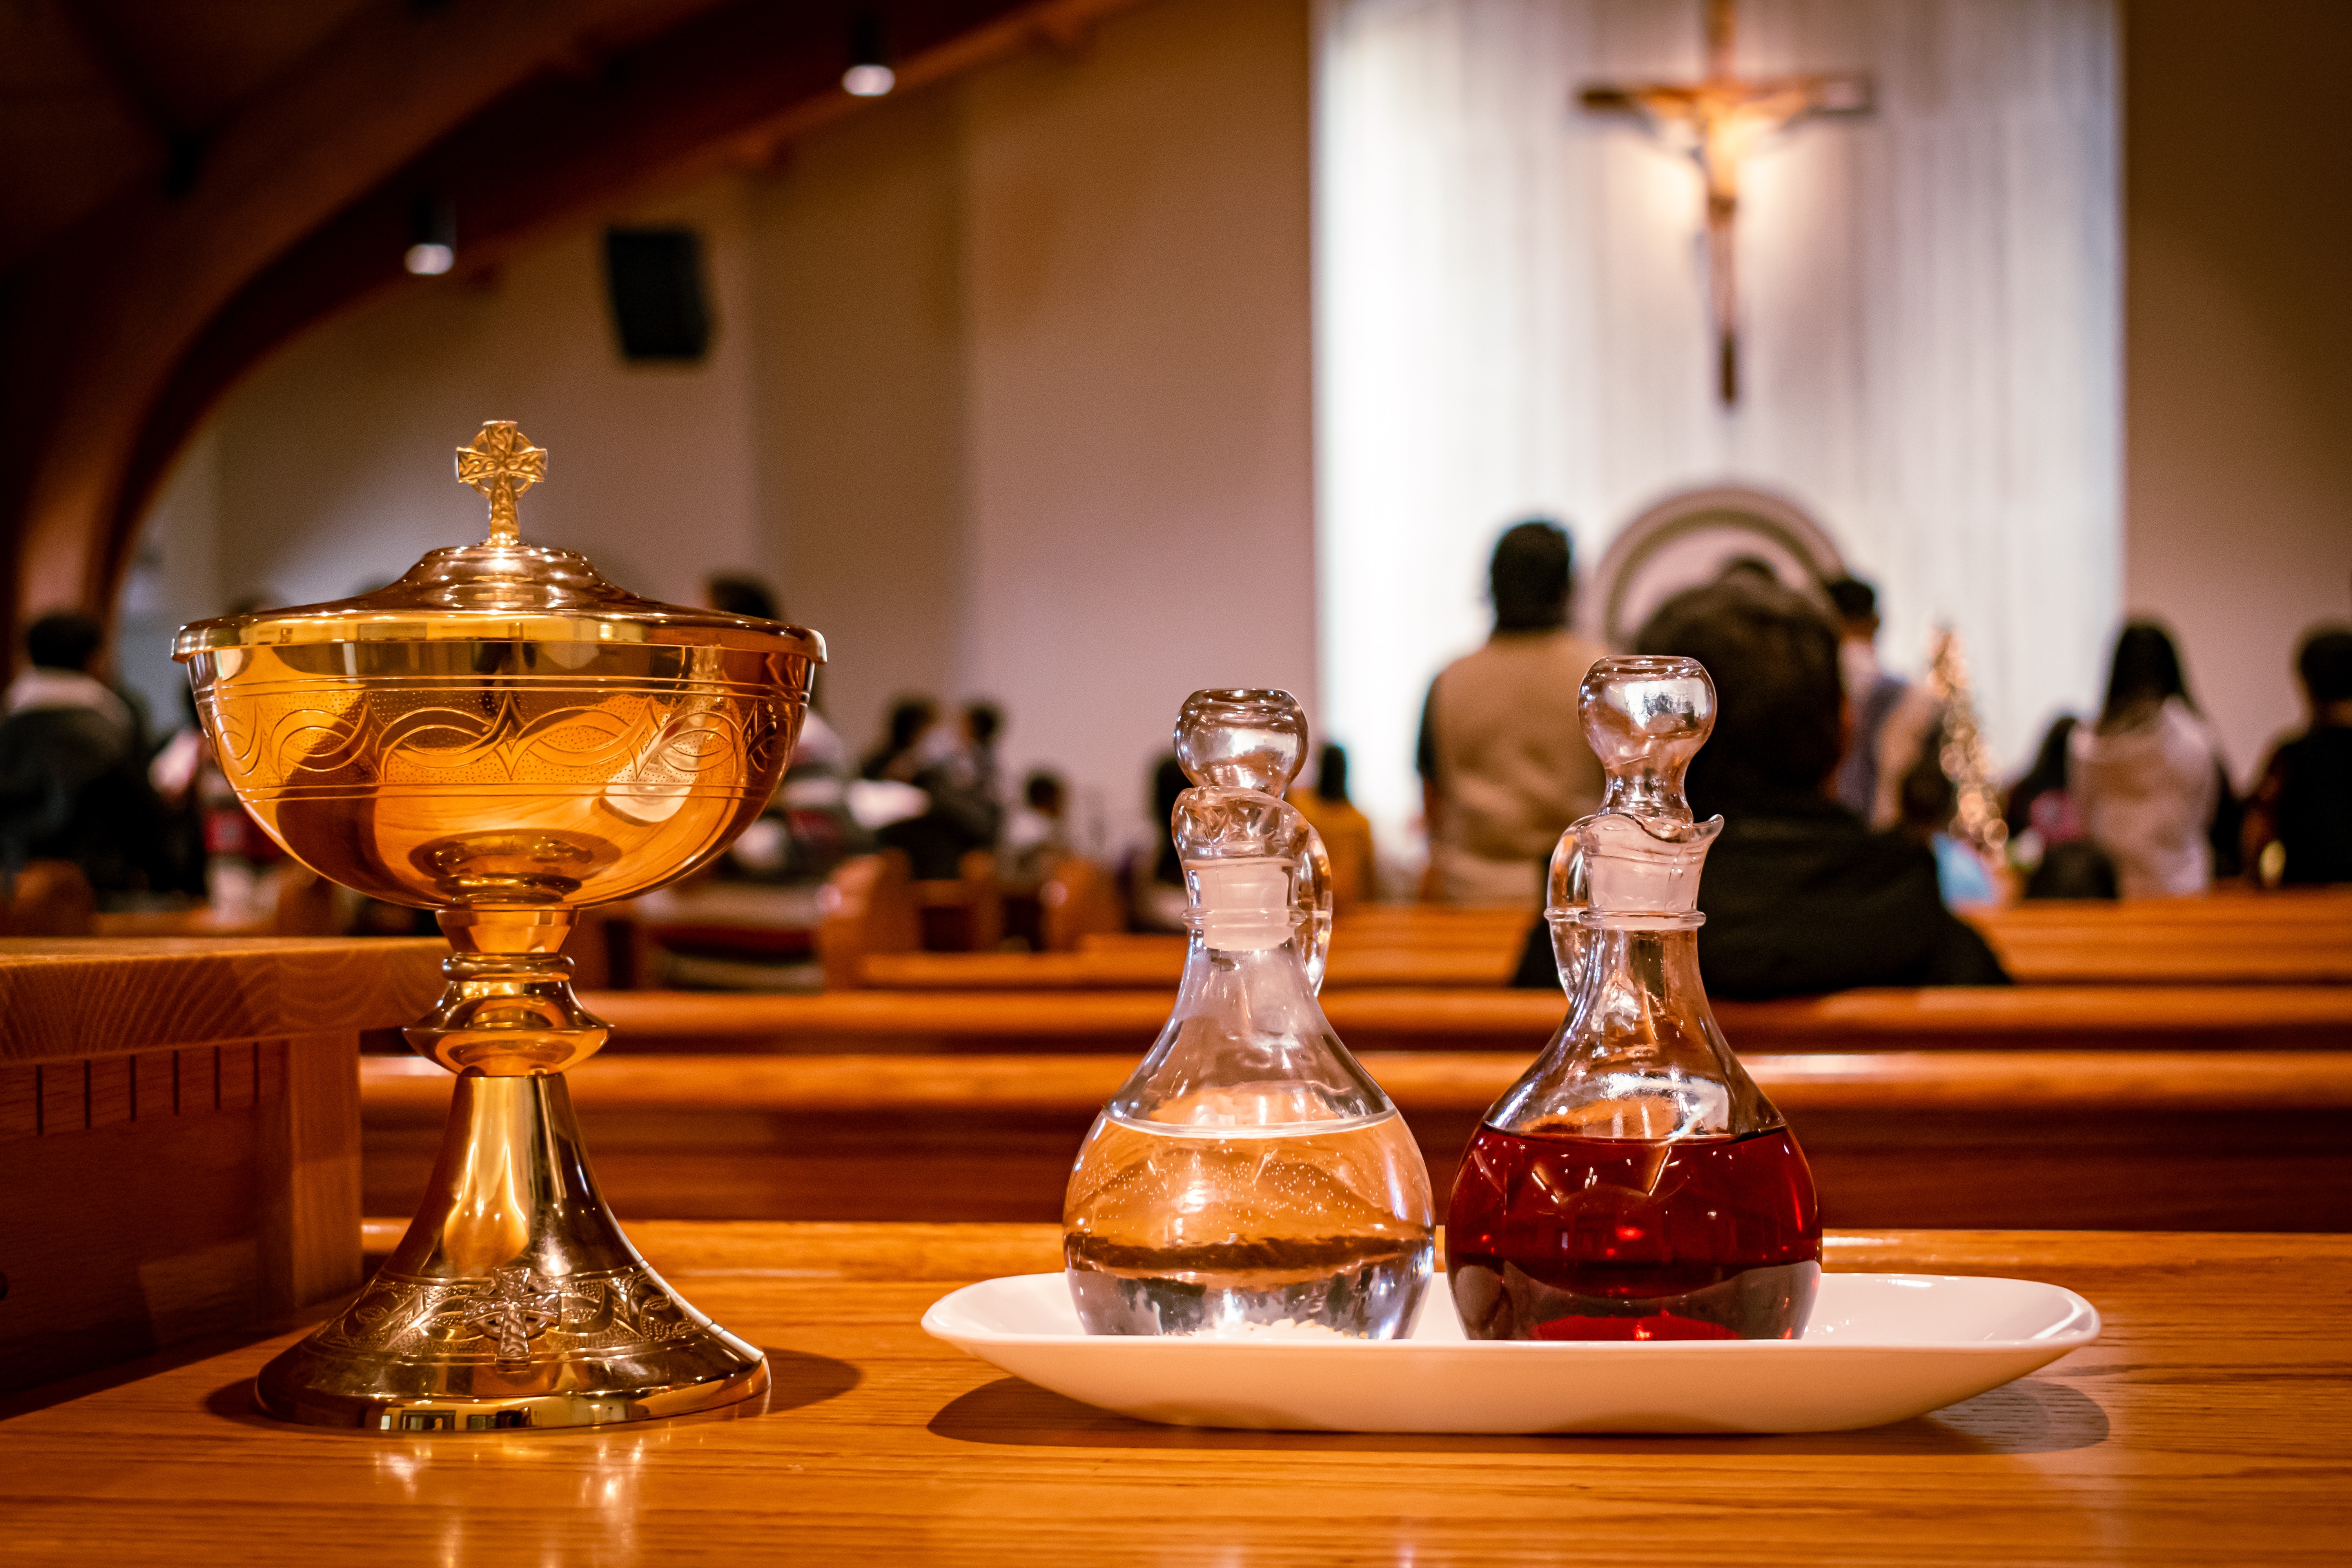 Gifts for consecration at the Mass